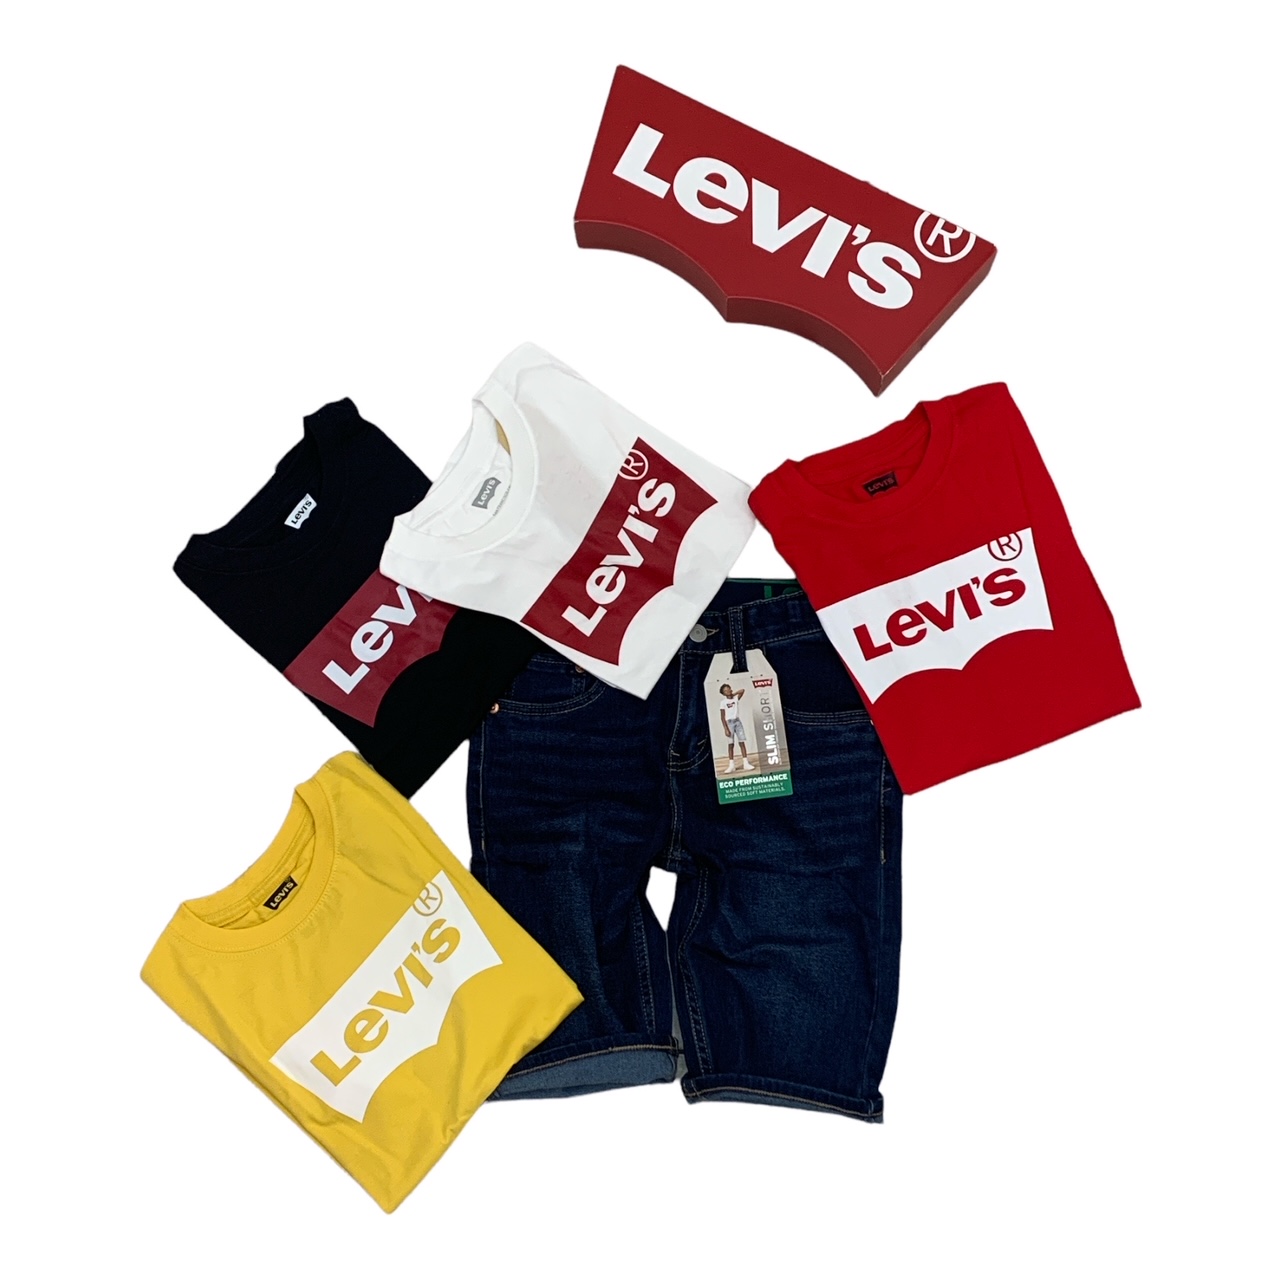  LEVIS | Cauzone curto | 9EE455D6B